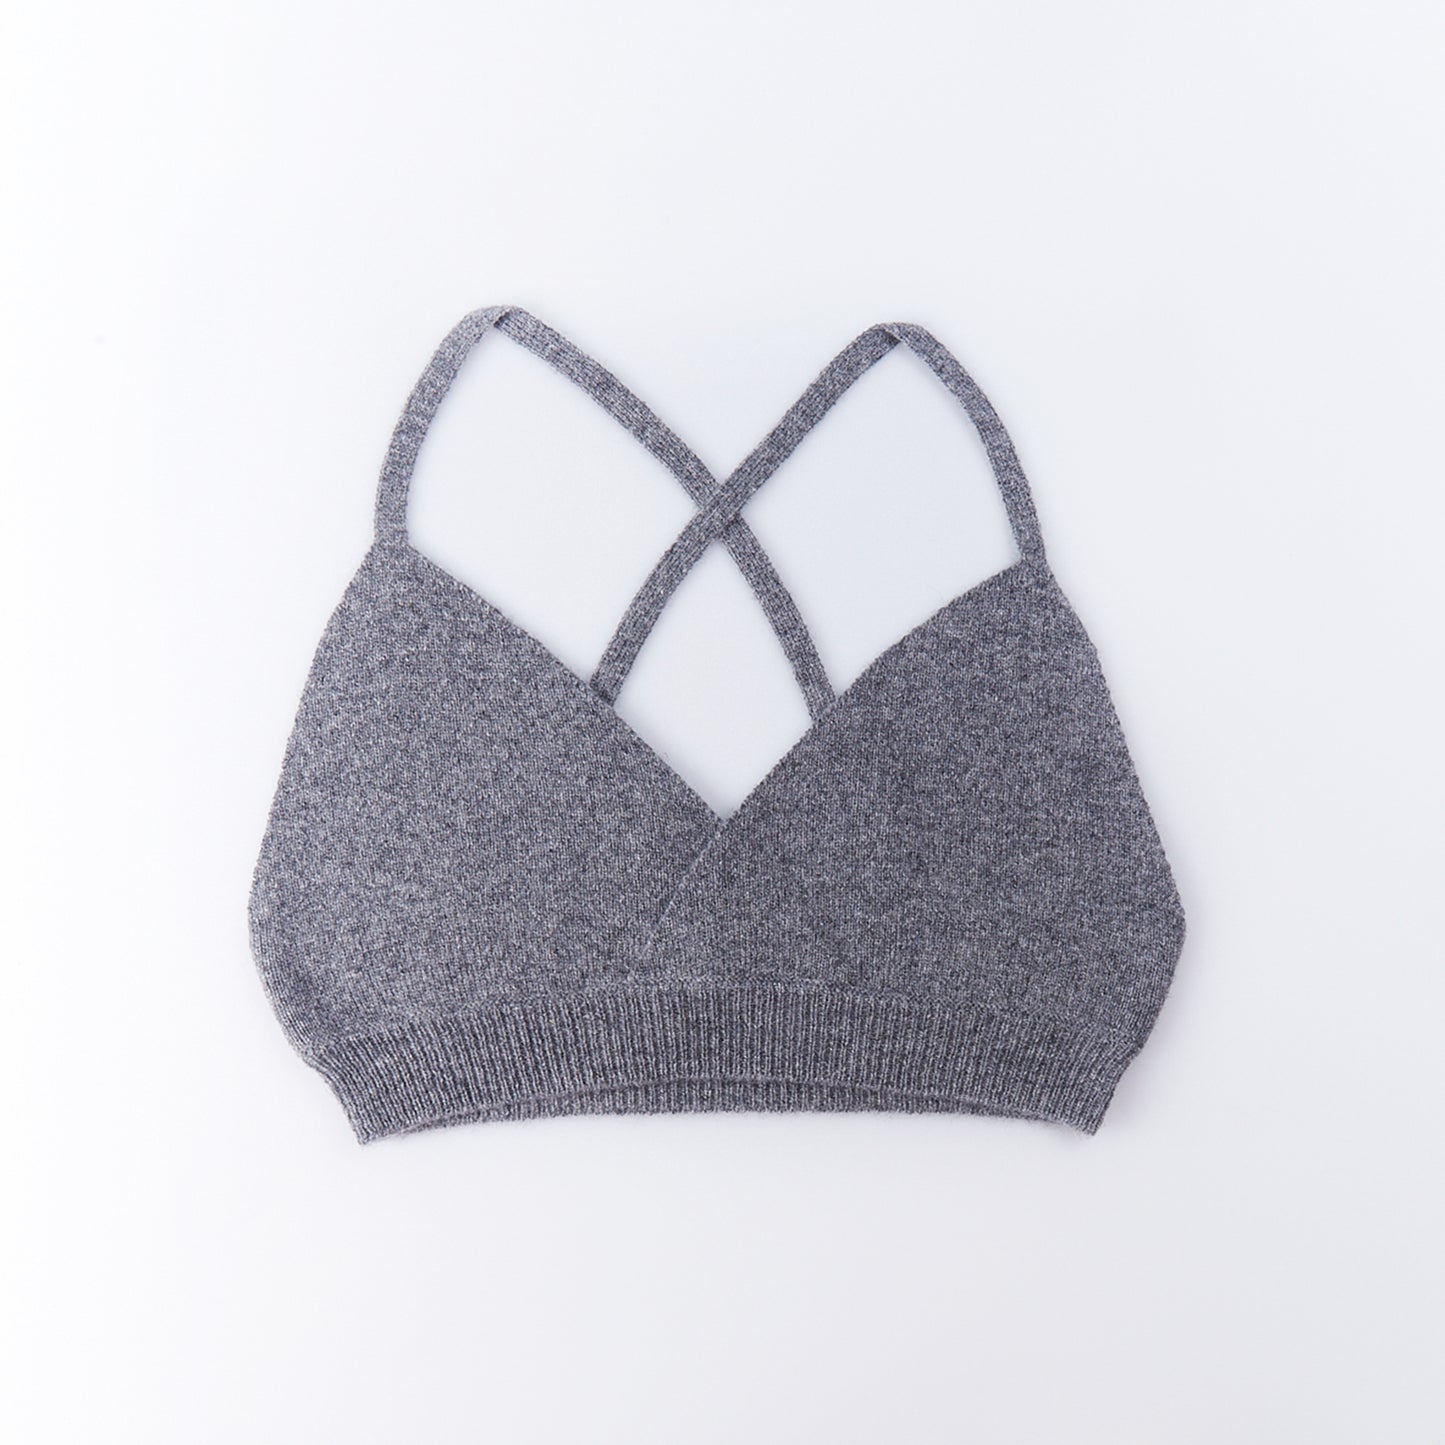 Cashmere knitted bra